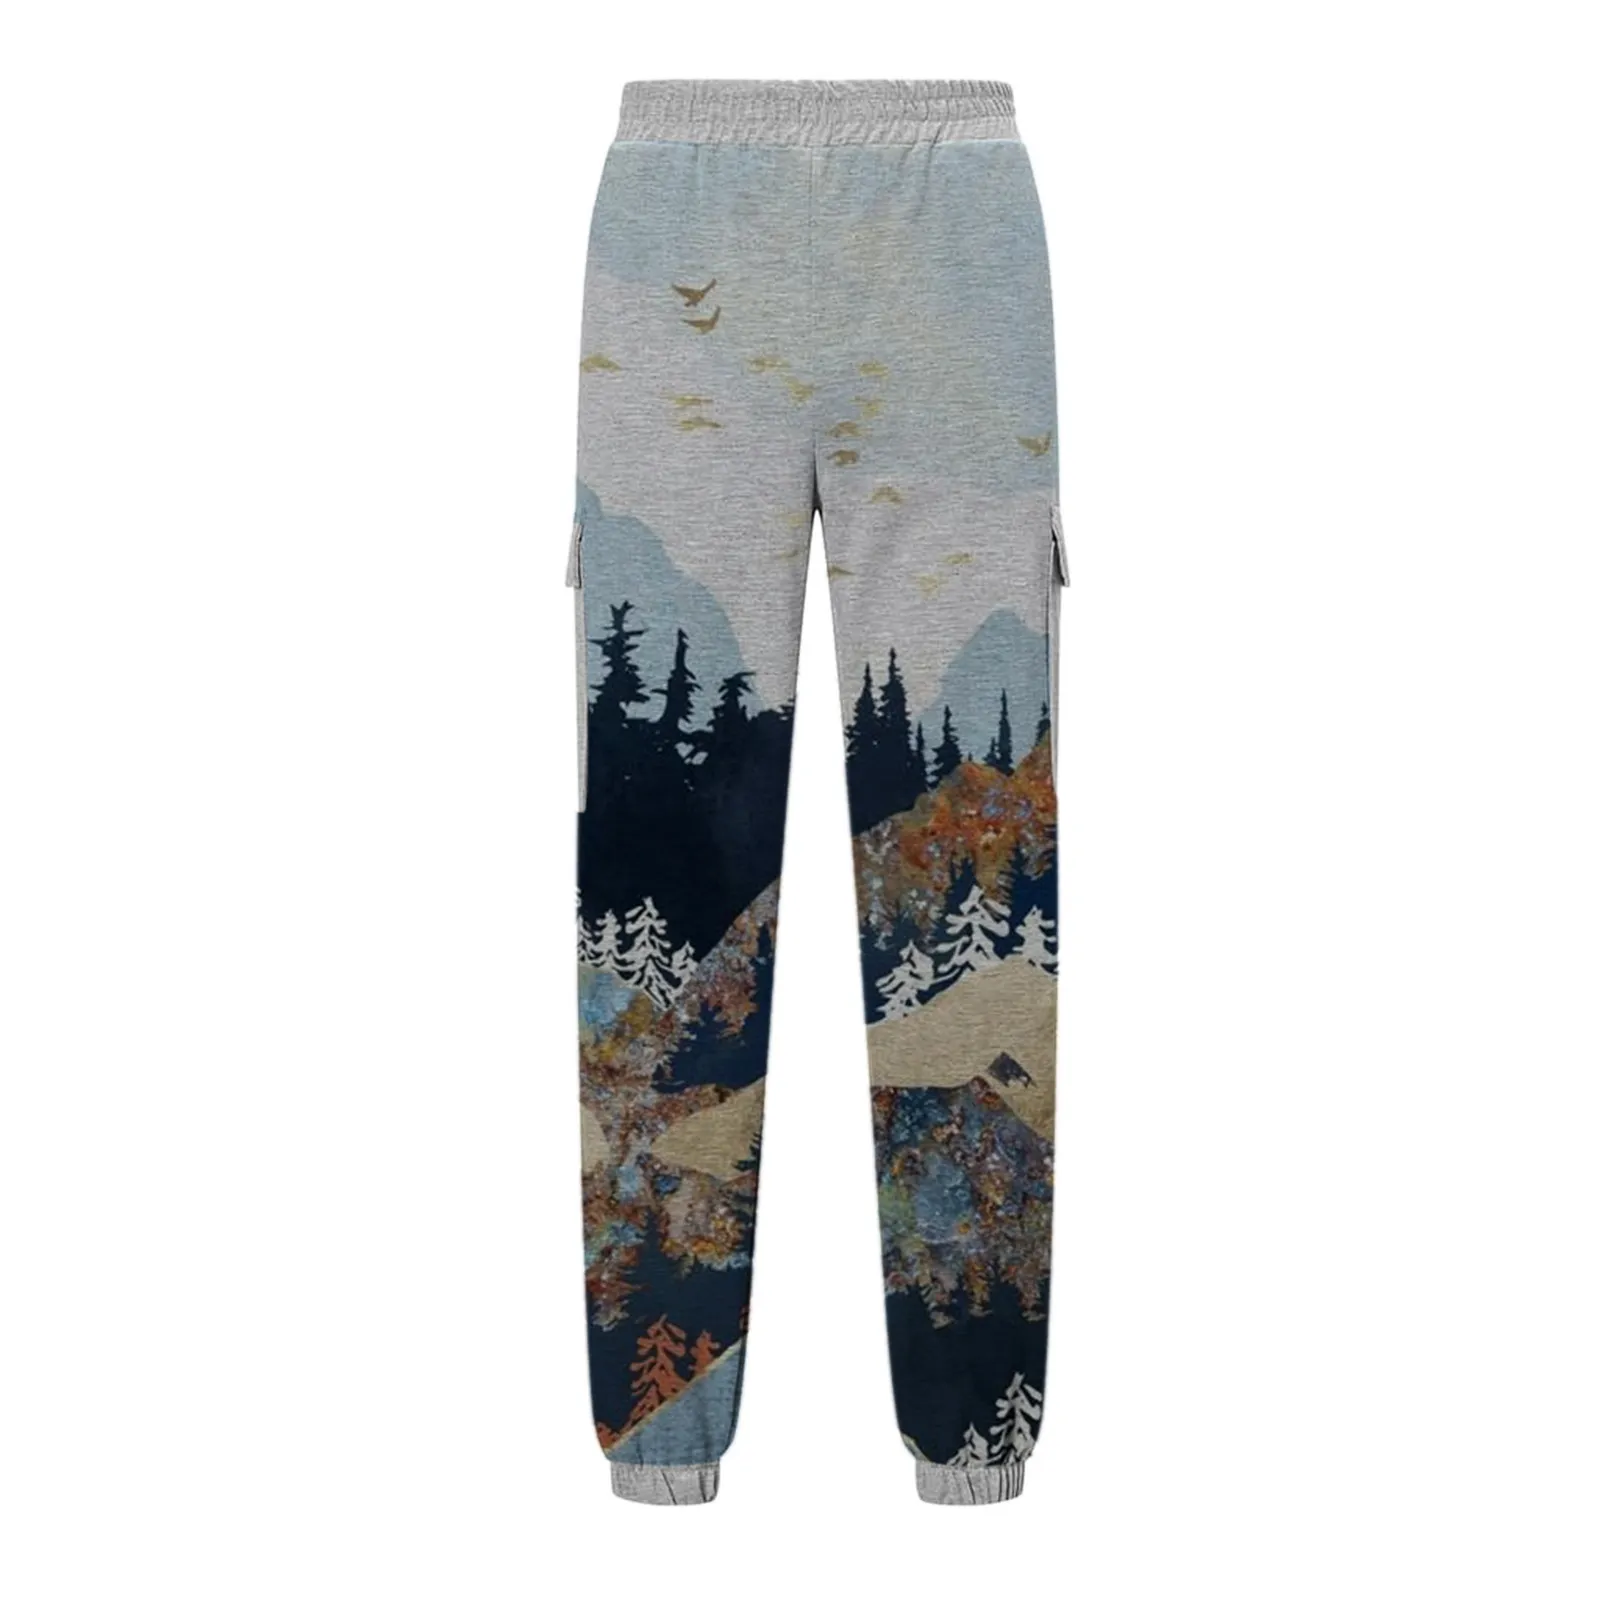 S-5xl Women's Plus Size Mountain Treetop Print Pocket Outdoor Sports Running Athletic Pants 201113